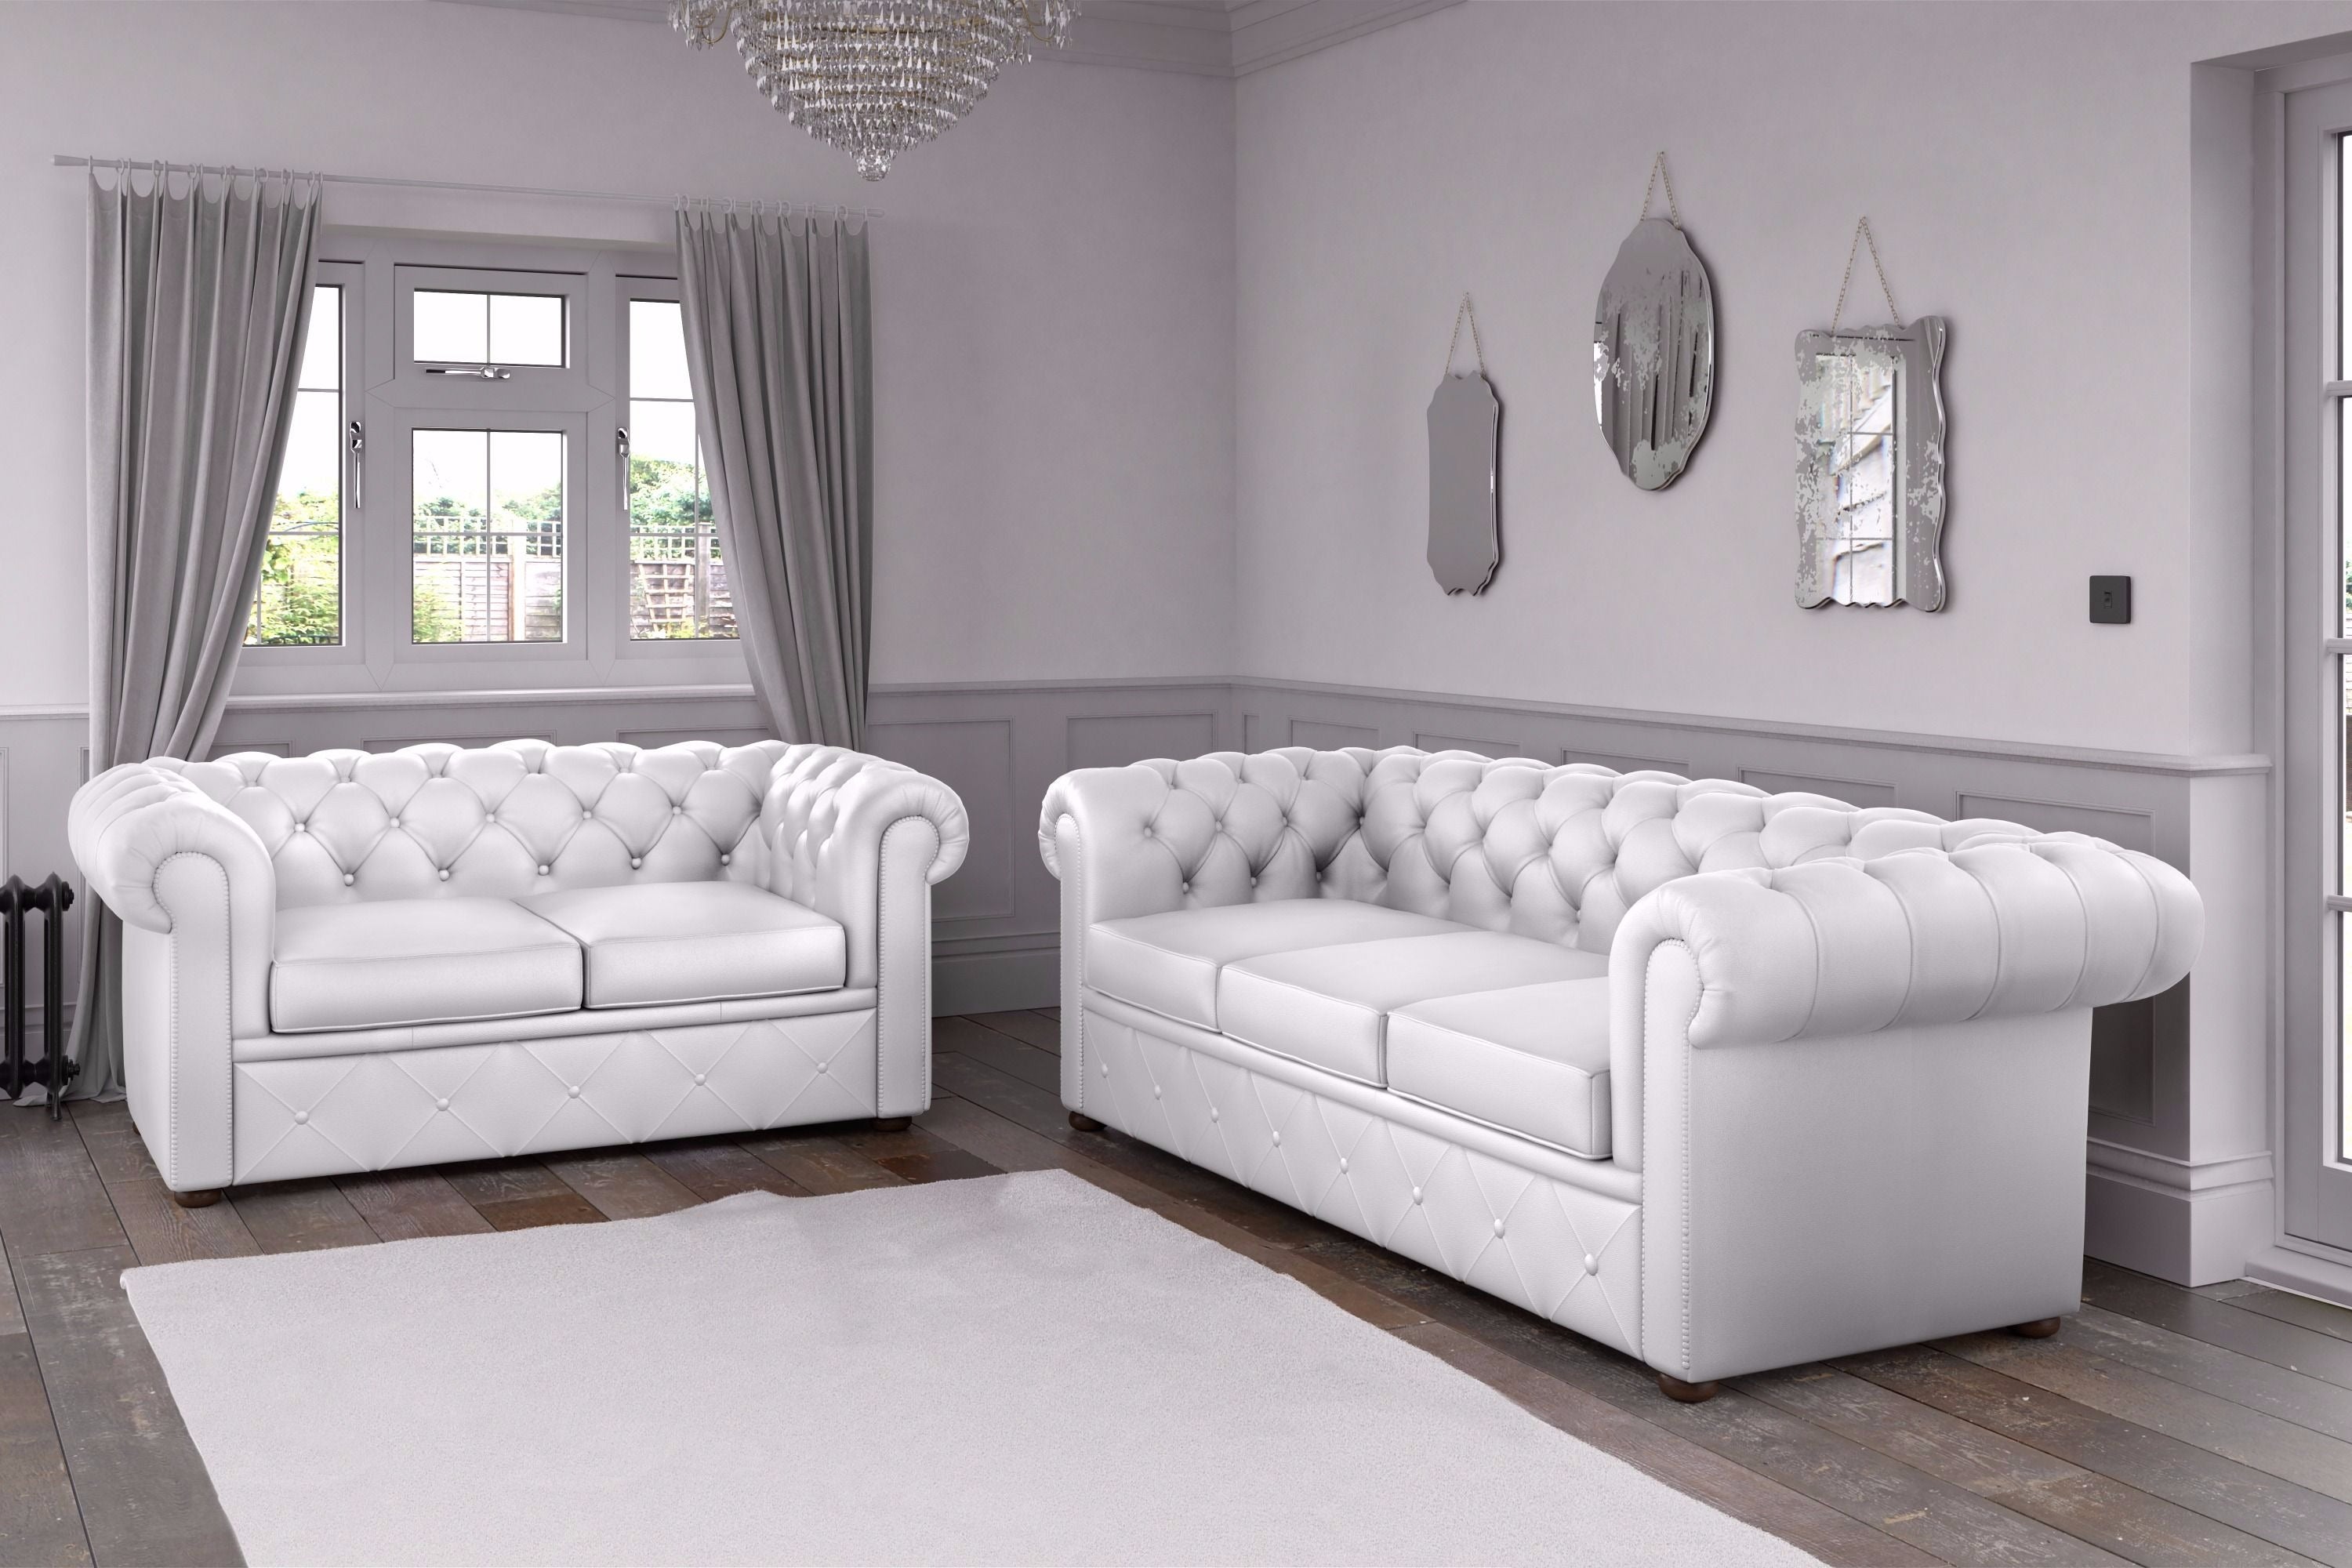 white faux leather sofa bed uk